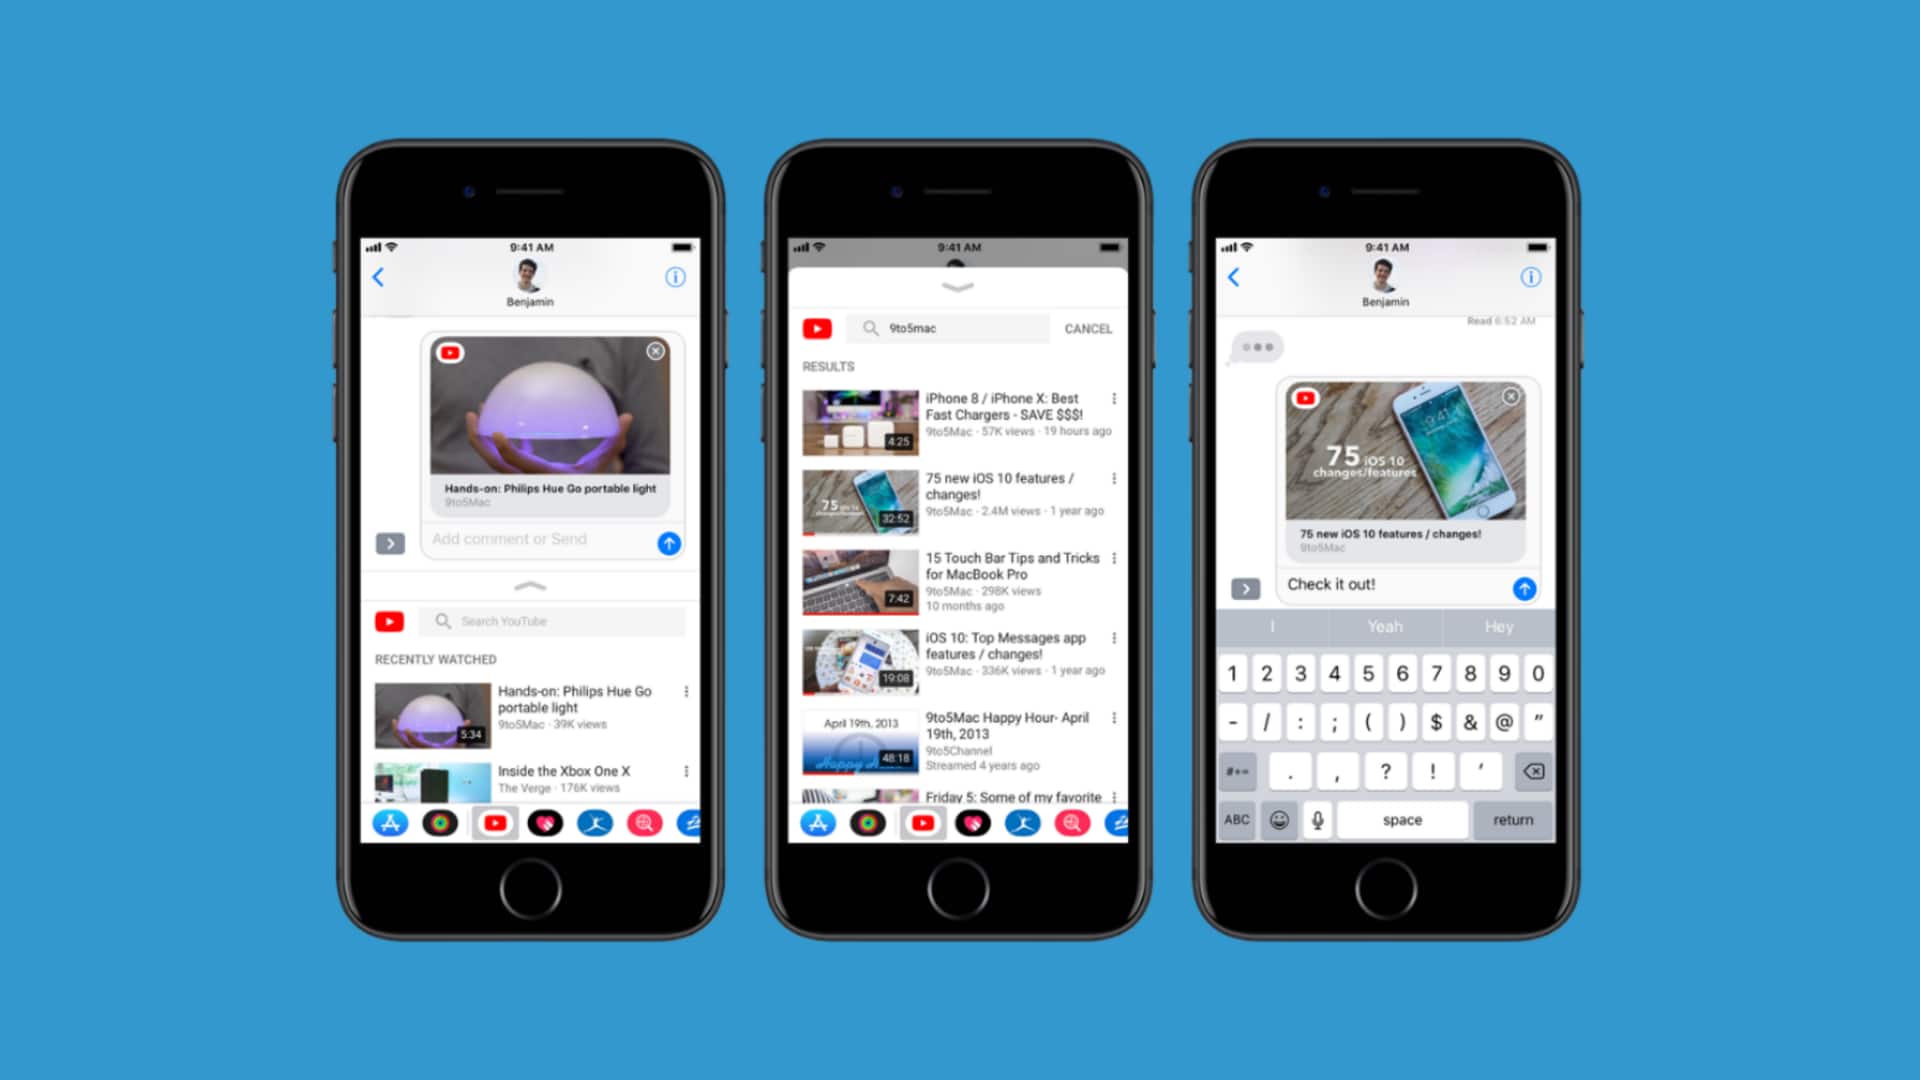 YouTube discontinues its iMessage app for iPhone, iPad users